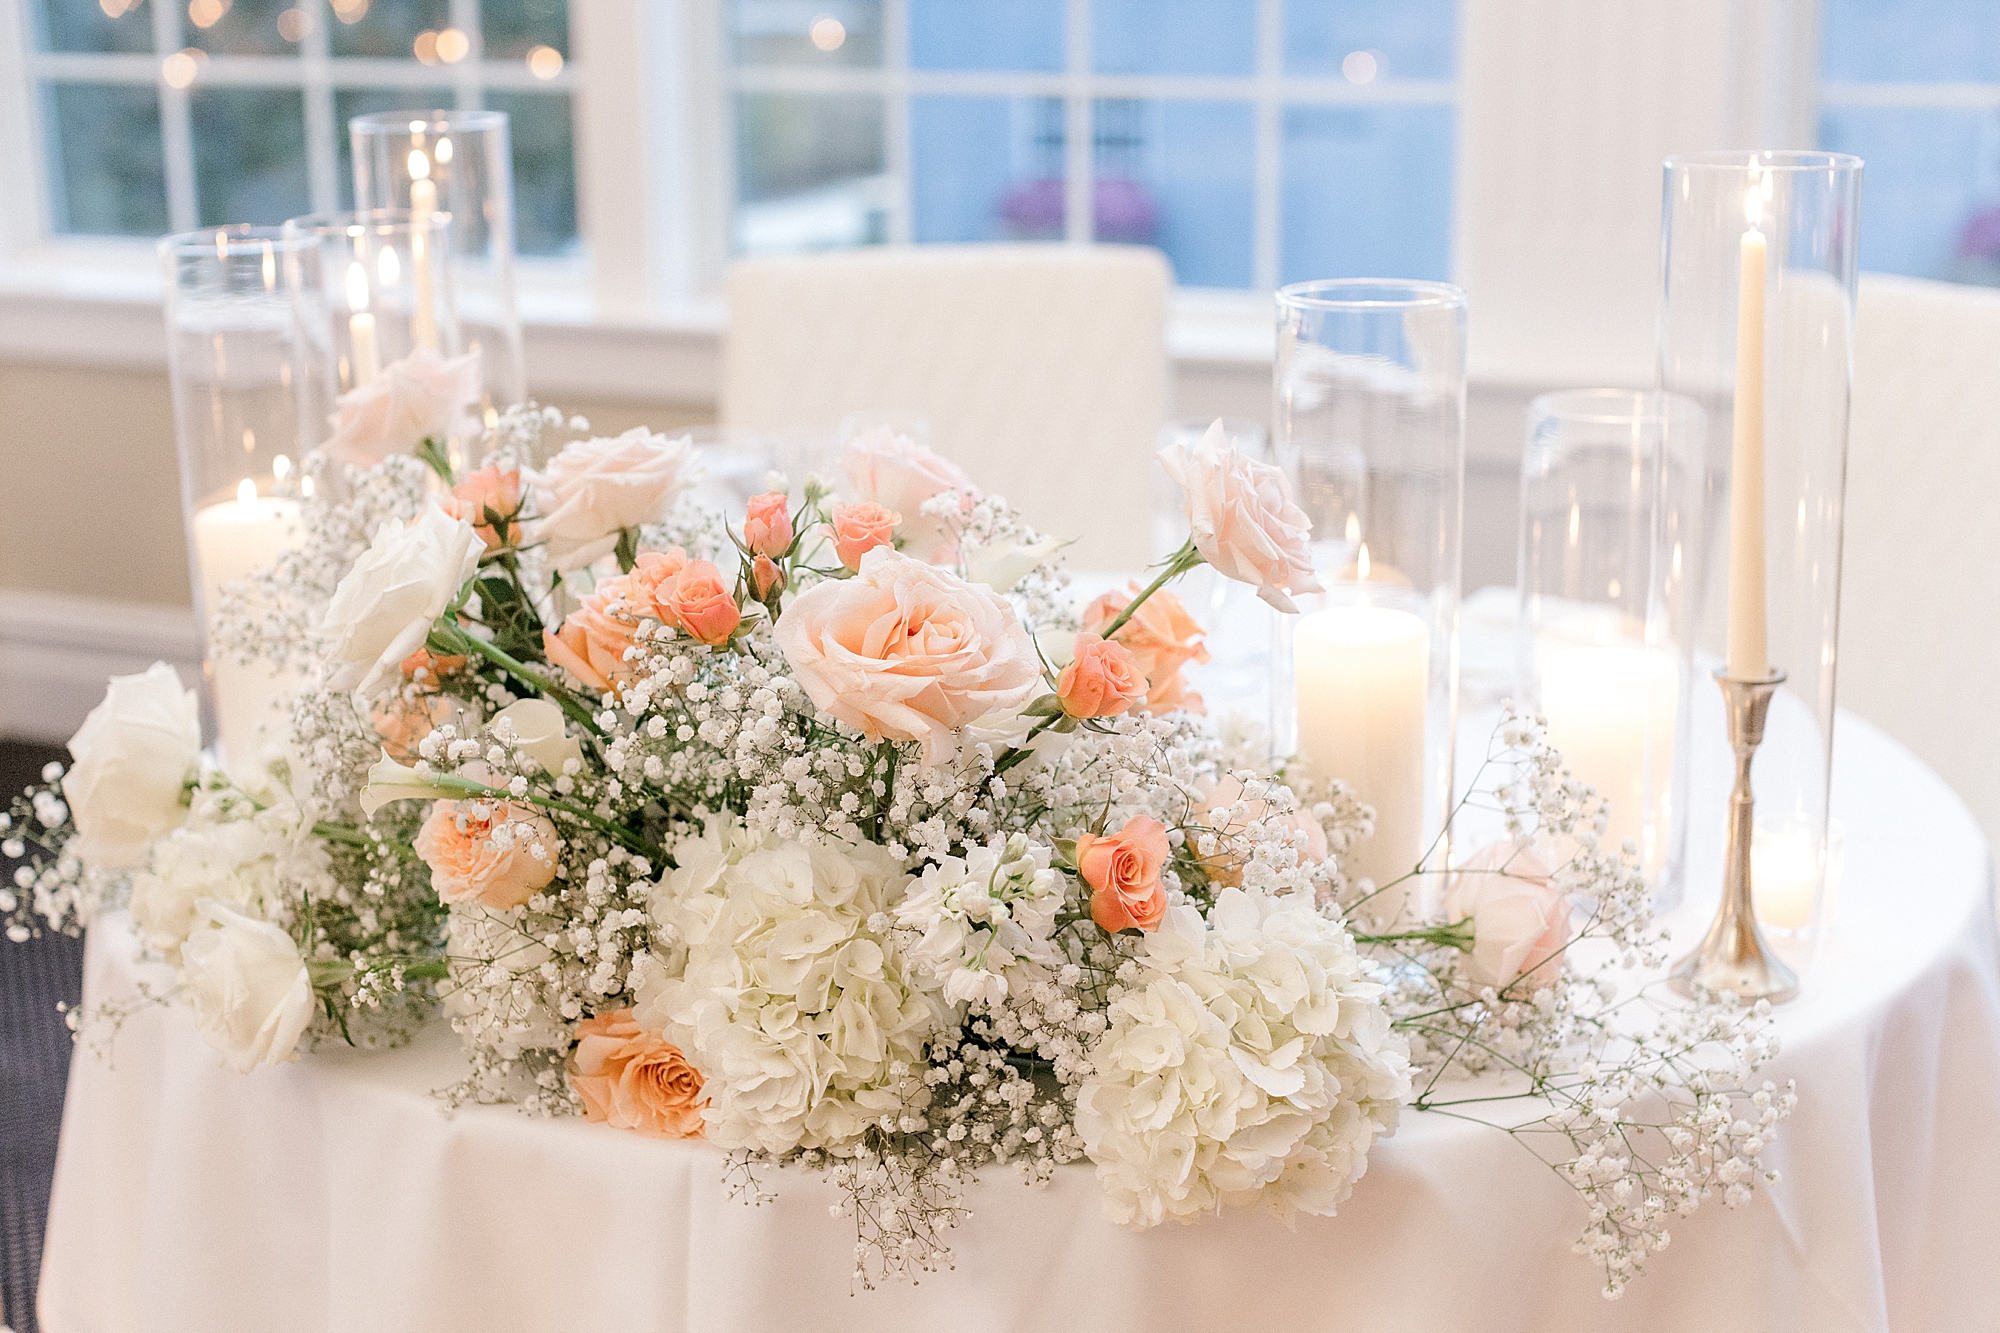 sweetheart table with peach and white flowers and baby's breath for summer wedding reception at Bonnet Island Estate